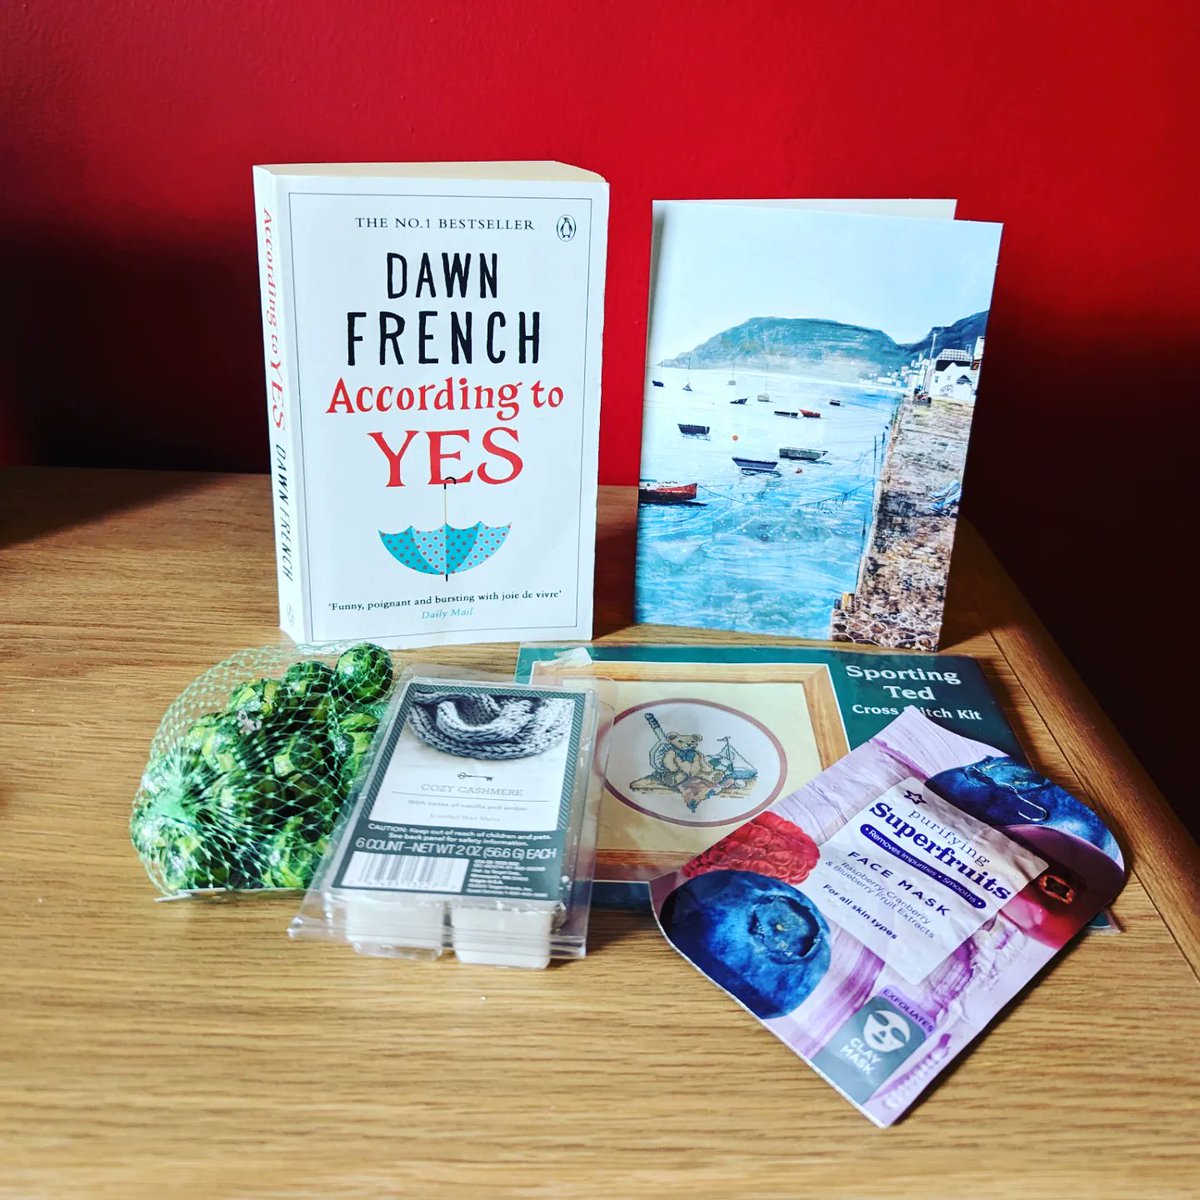 Book post 📮

☂️ According to Yes by Dawn French, and some goodies from my Secret Book Club Book Swap 💕

#accordingtoyes #dawnfrench #bookclub #bookclubsecretswap #bookswap